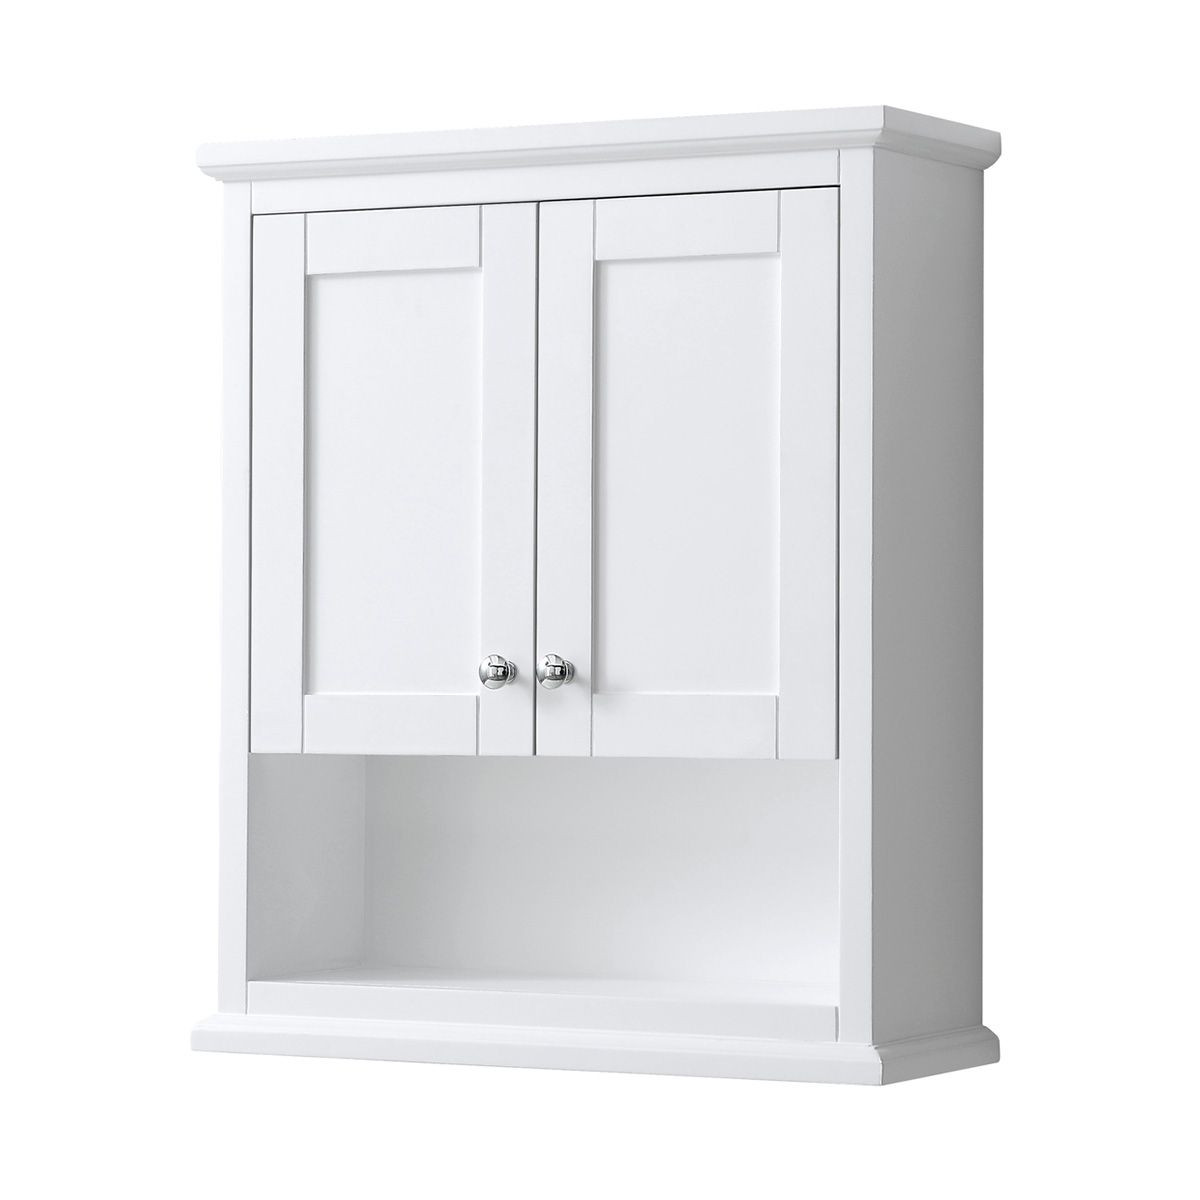 Mounted Bathroom Cabinet
 Wall Mounted Bathroom Storage Cabinet in White